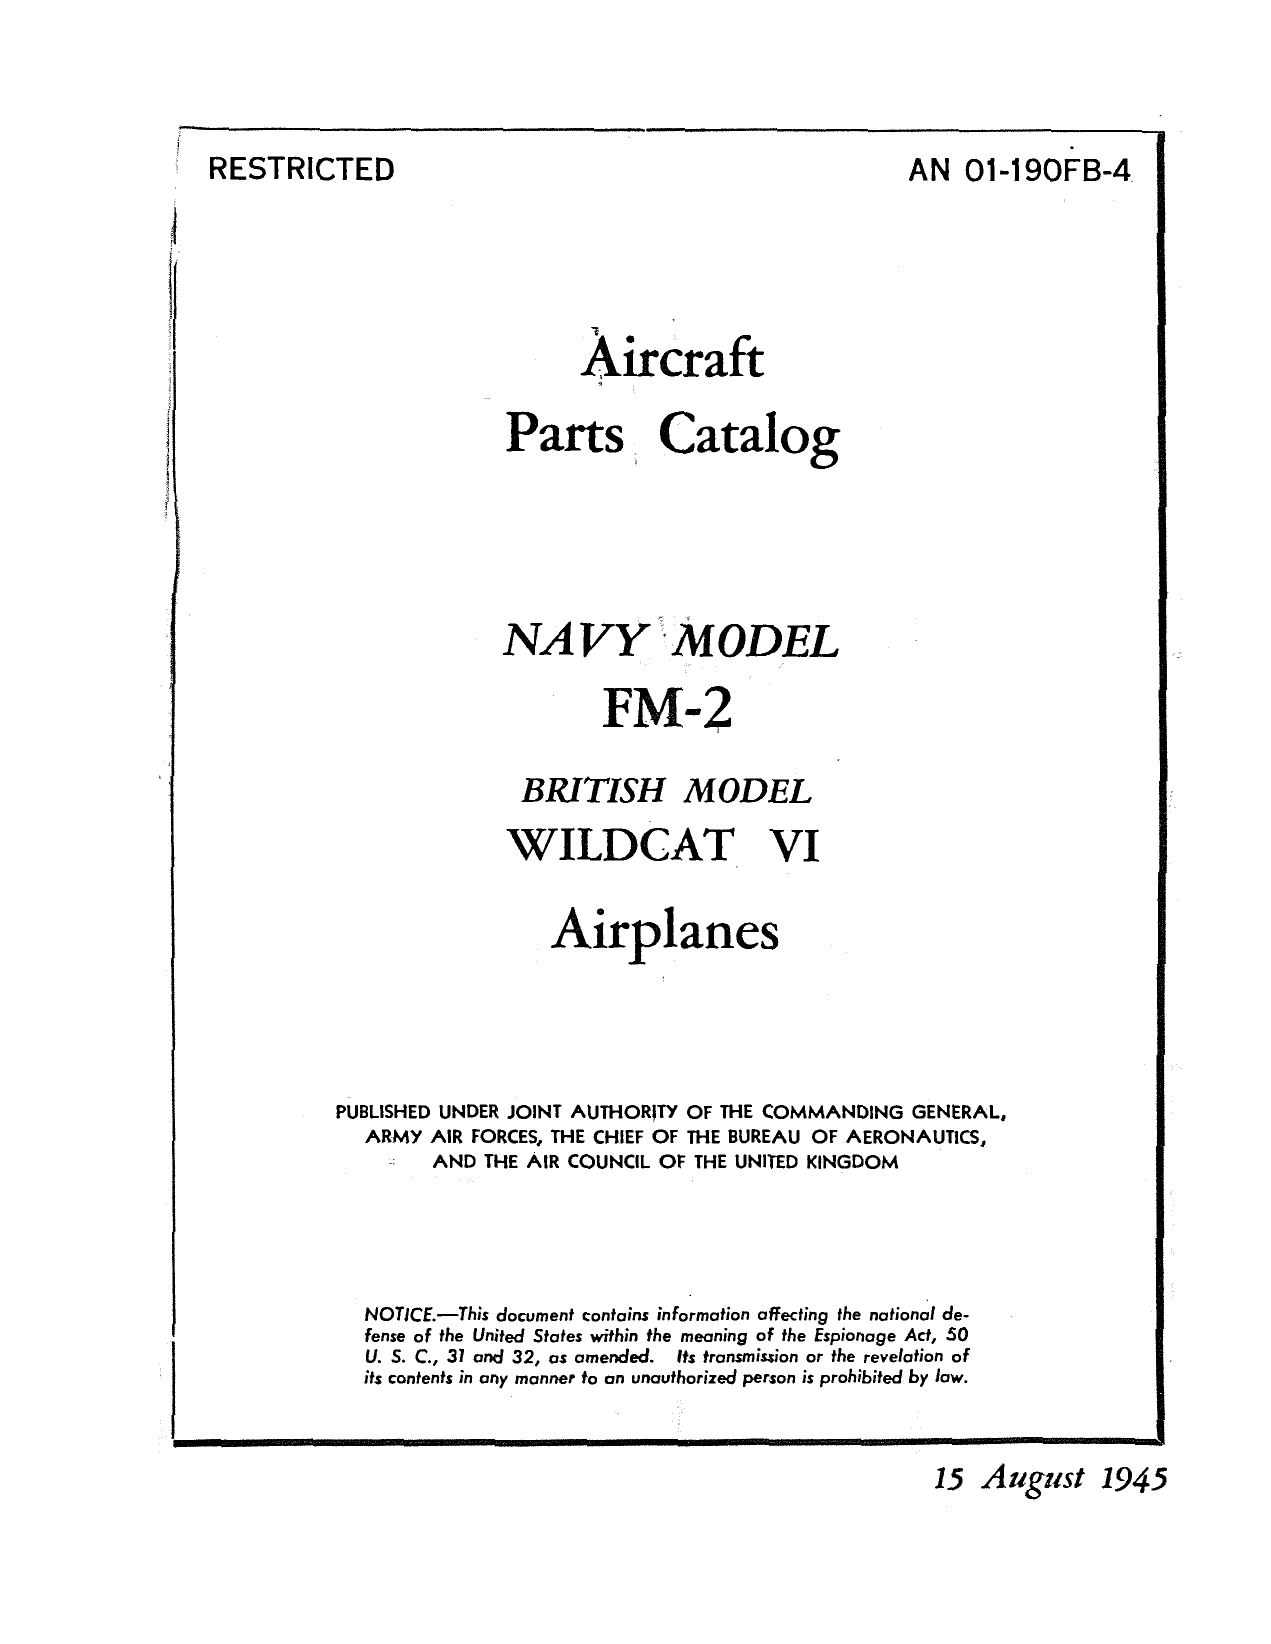 Sample page 1 from AirCorps Library document: Parts Catalog - FM-2